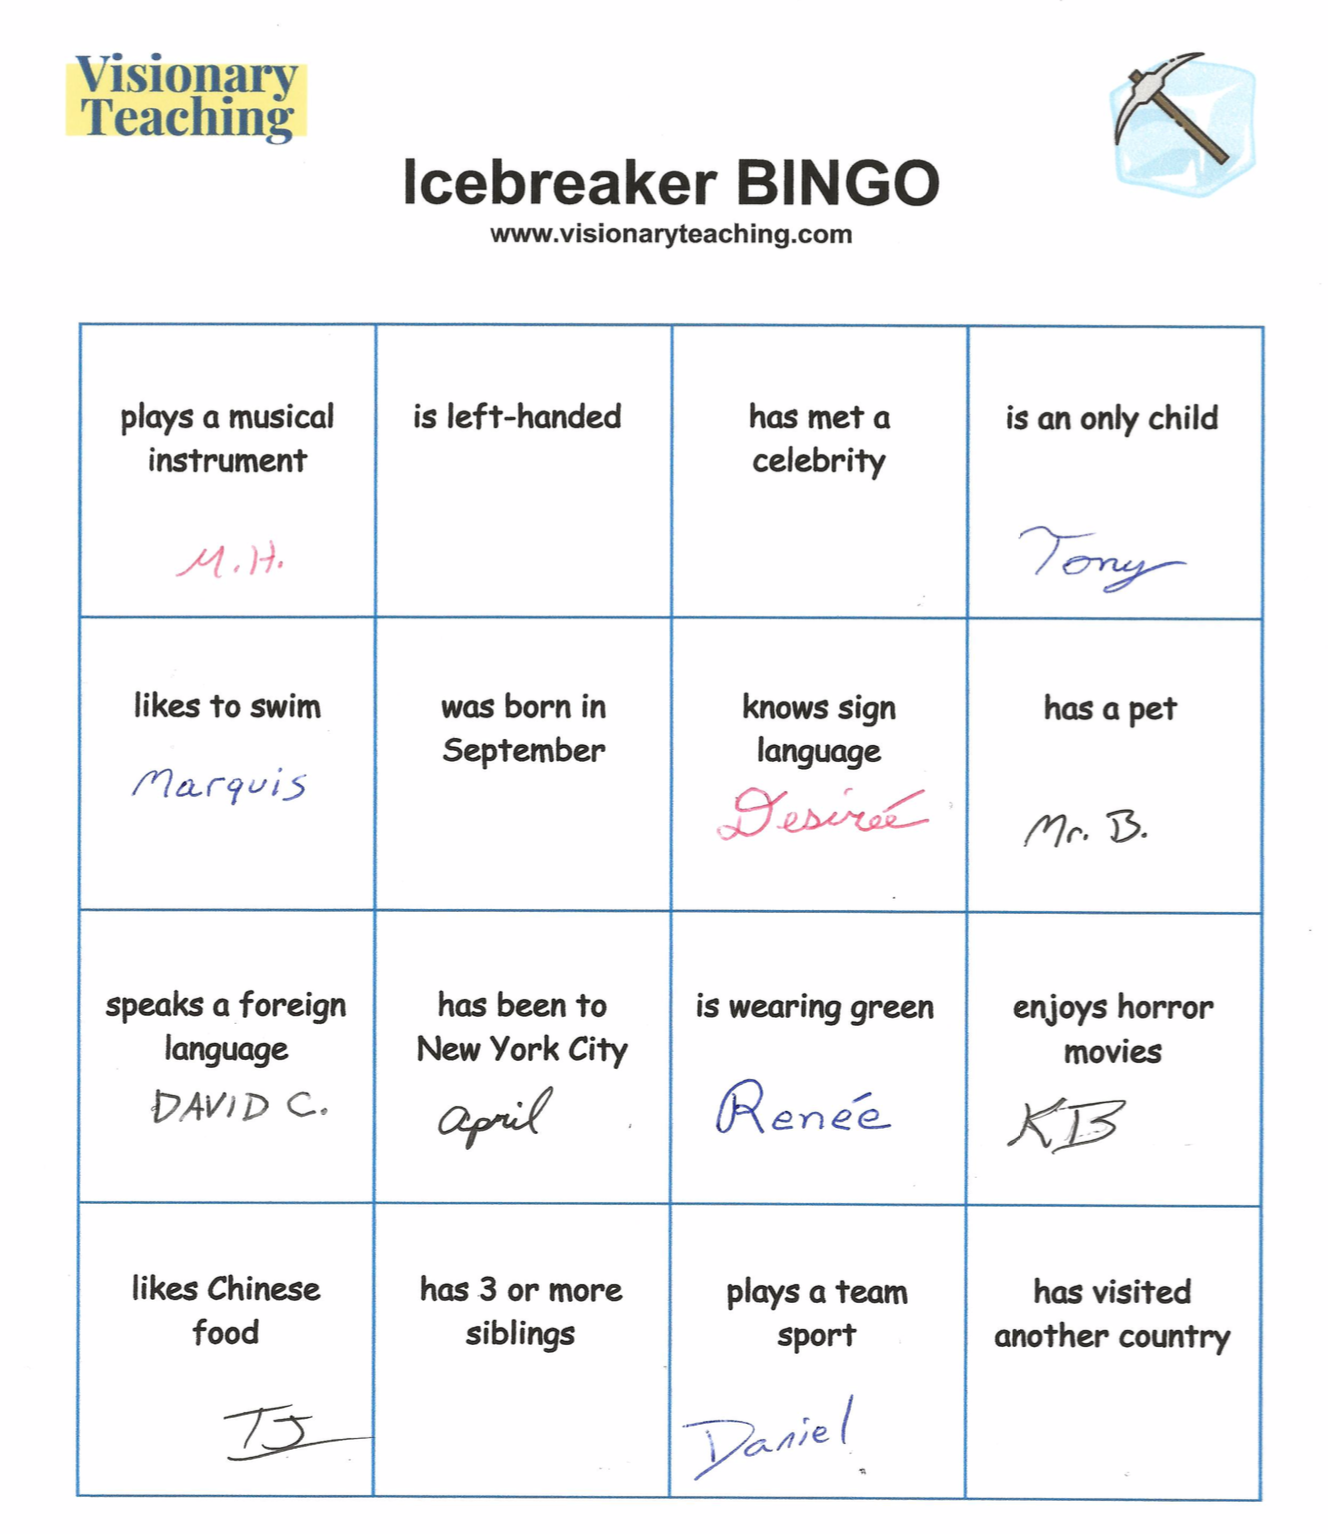 This is a sample Icebreaker BINGO card with a grid of 16 blocks and a variety of signatures written on various blocks